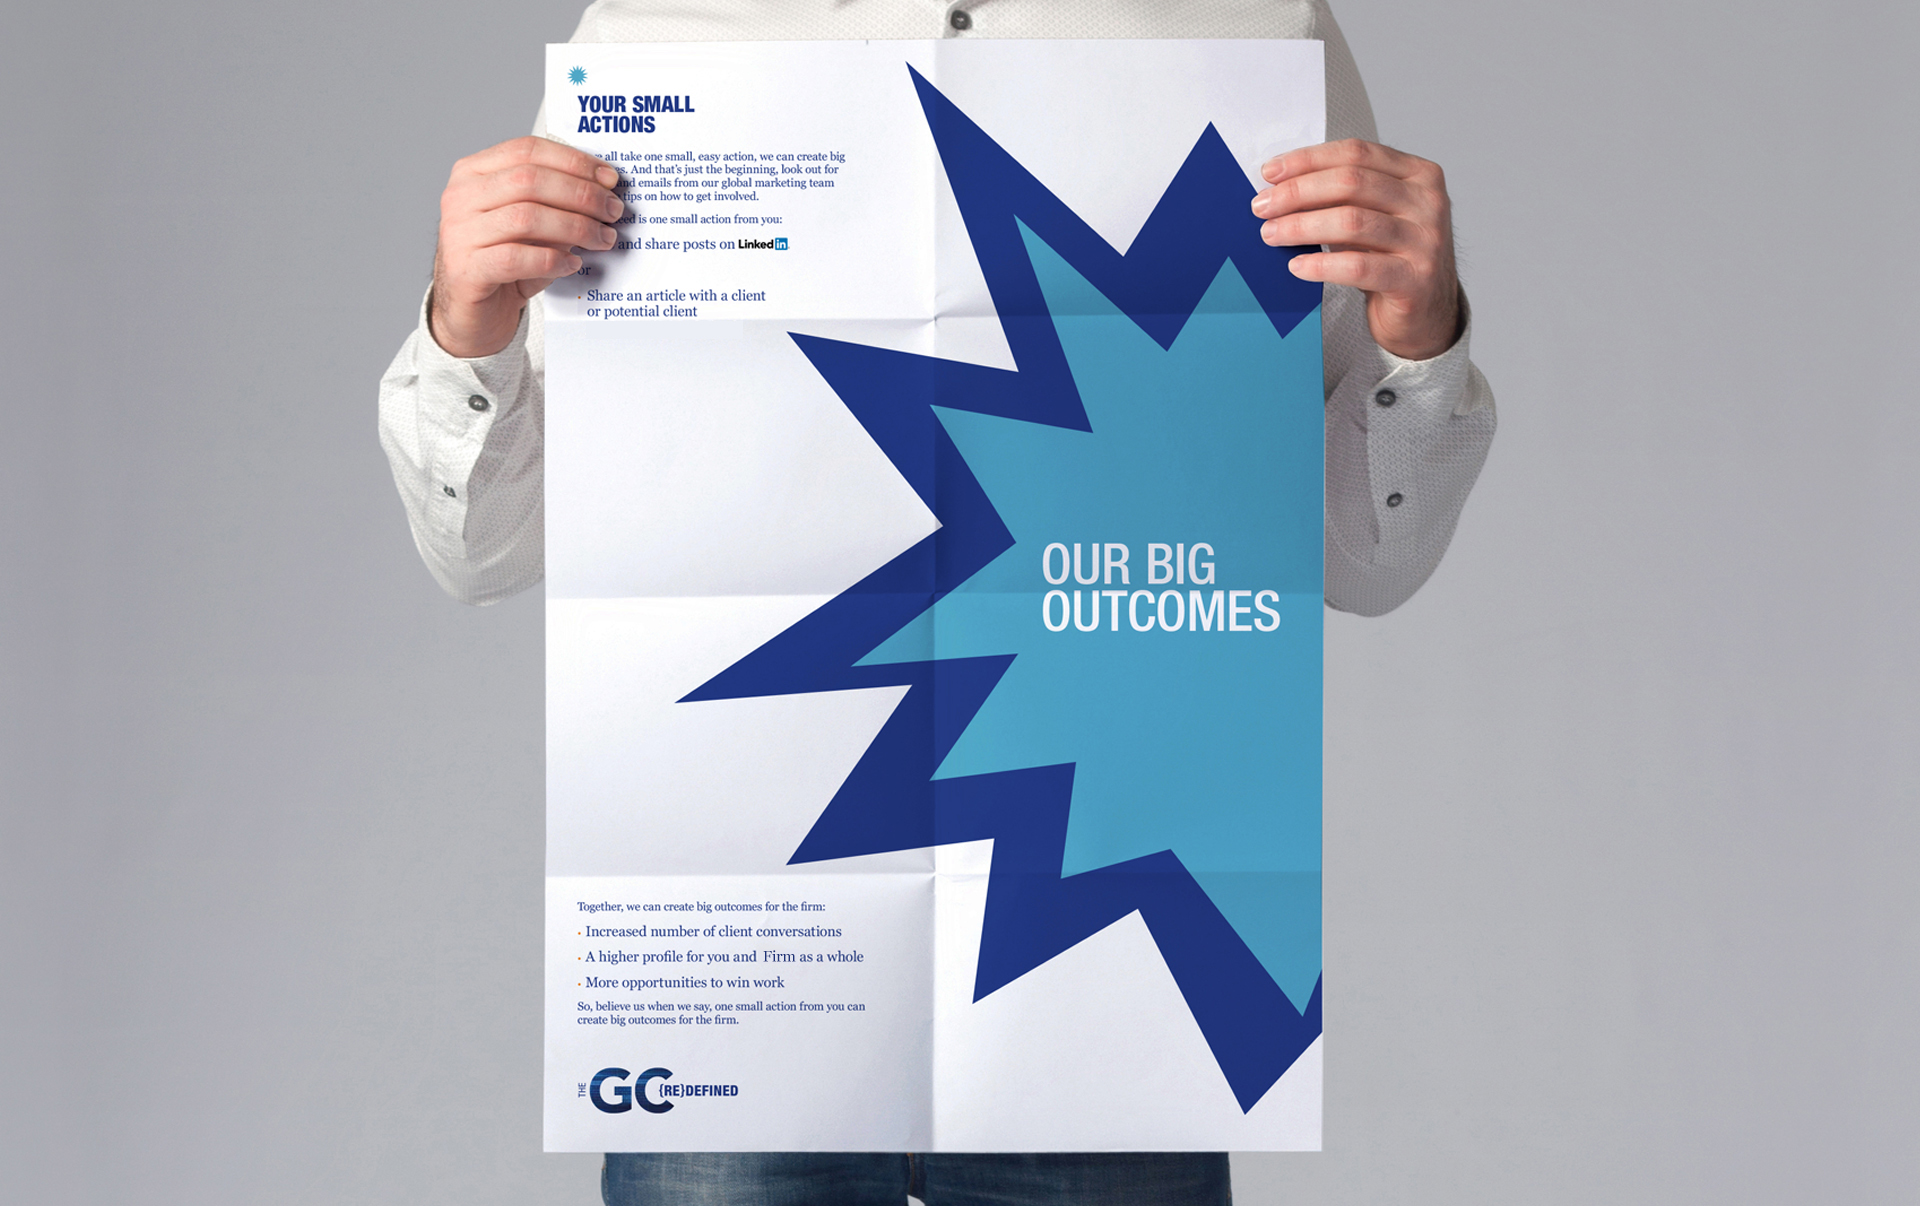 Law firm brand and marketing Our big outcomes posters